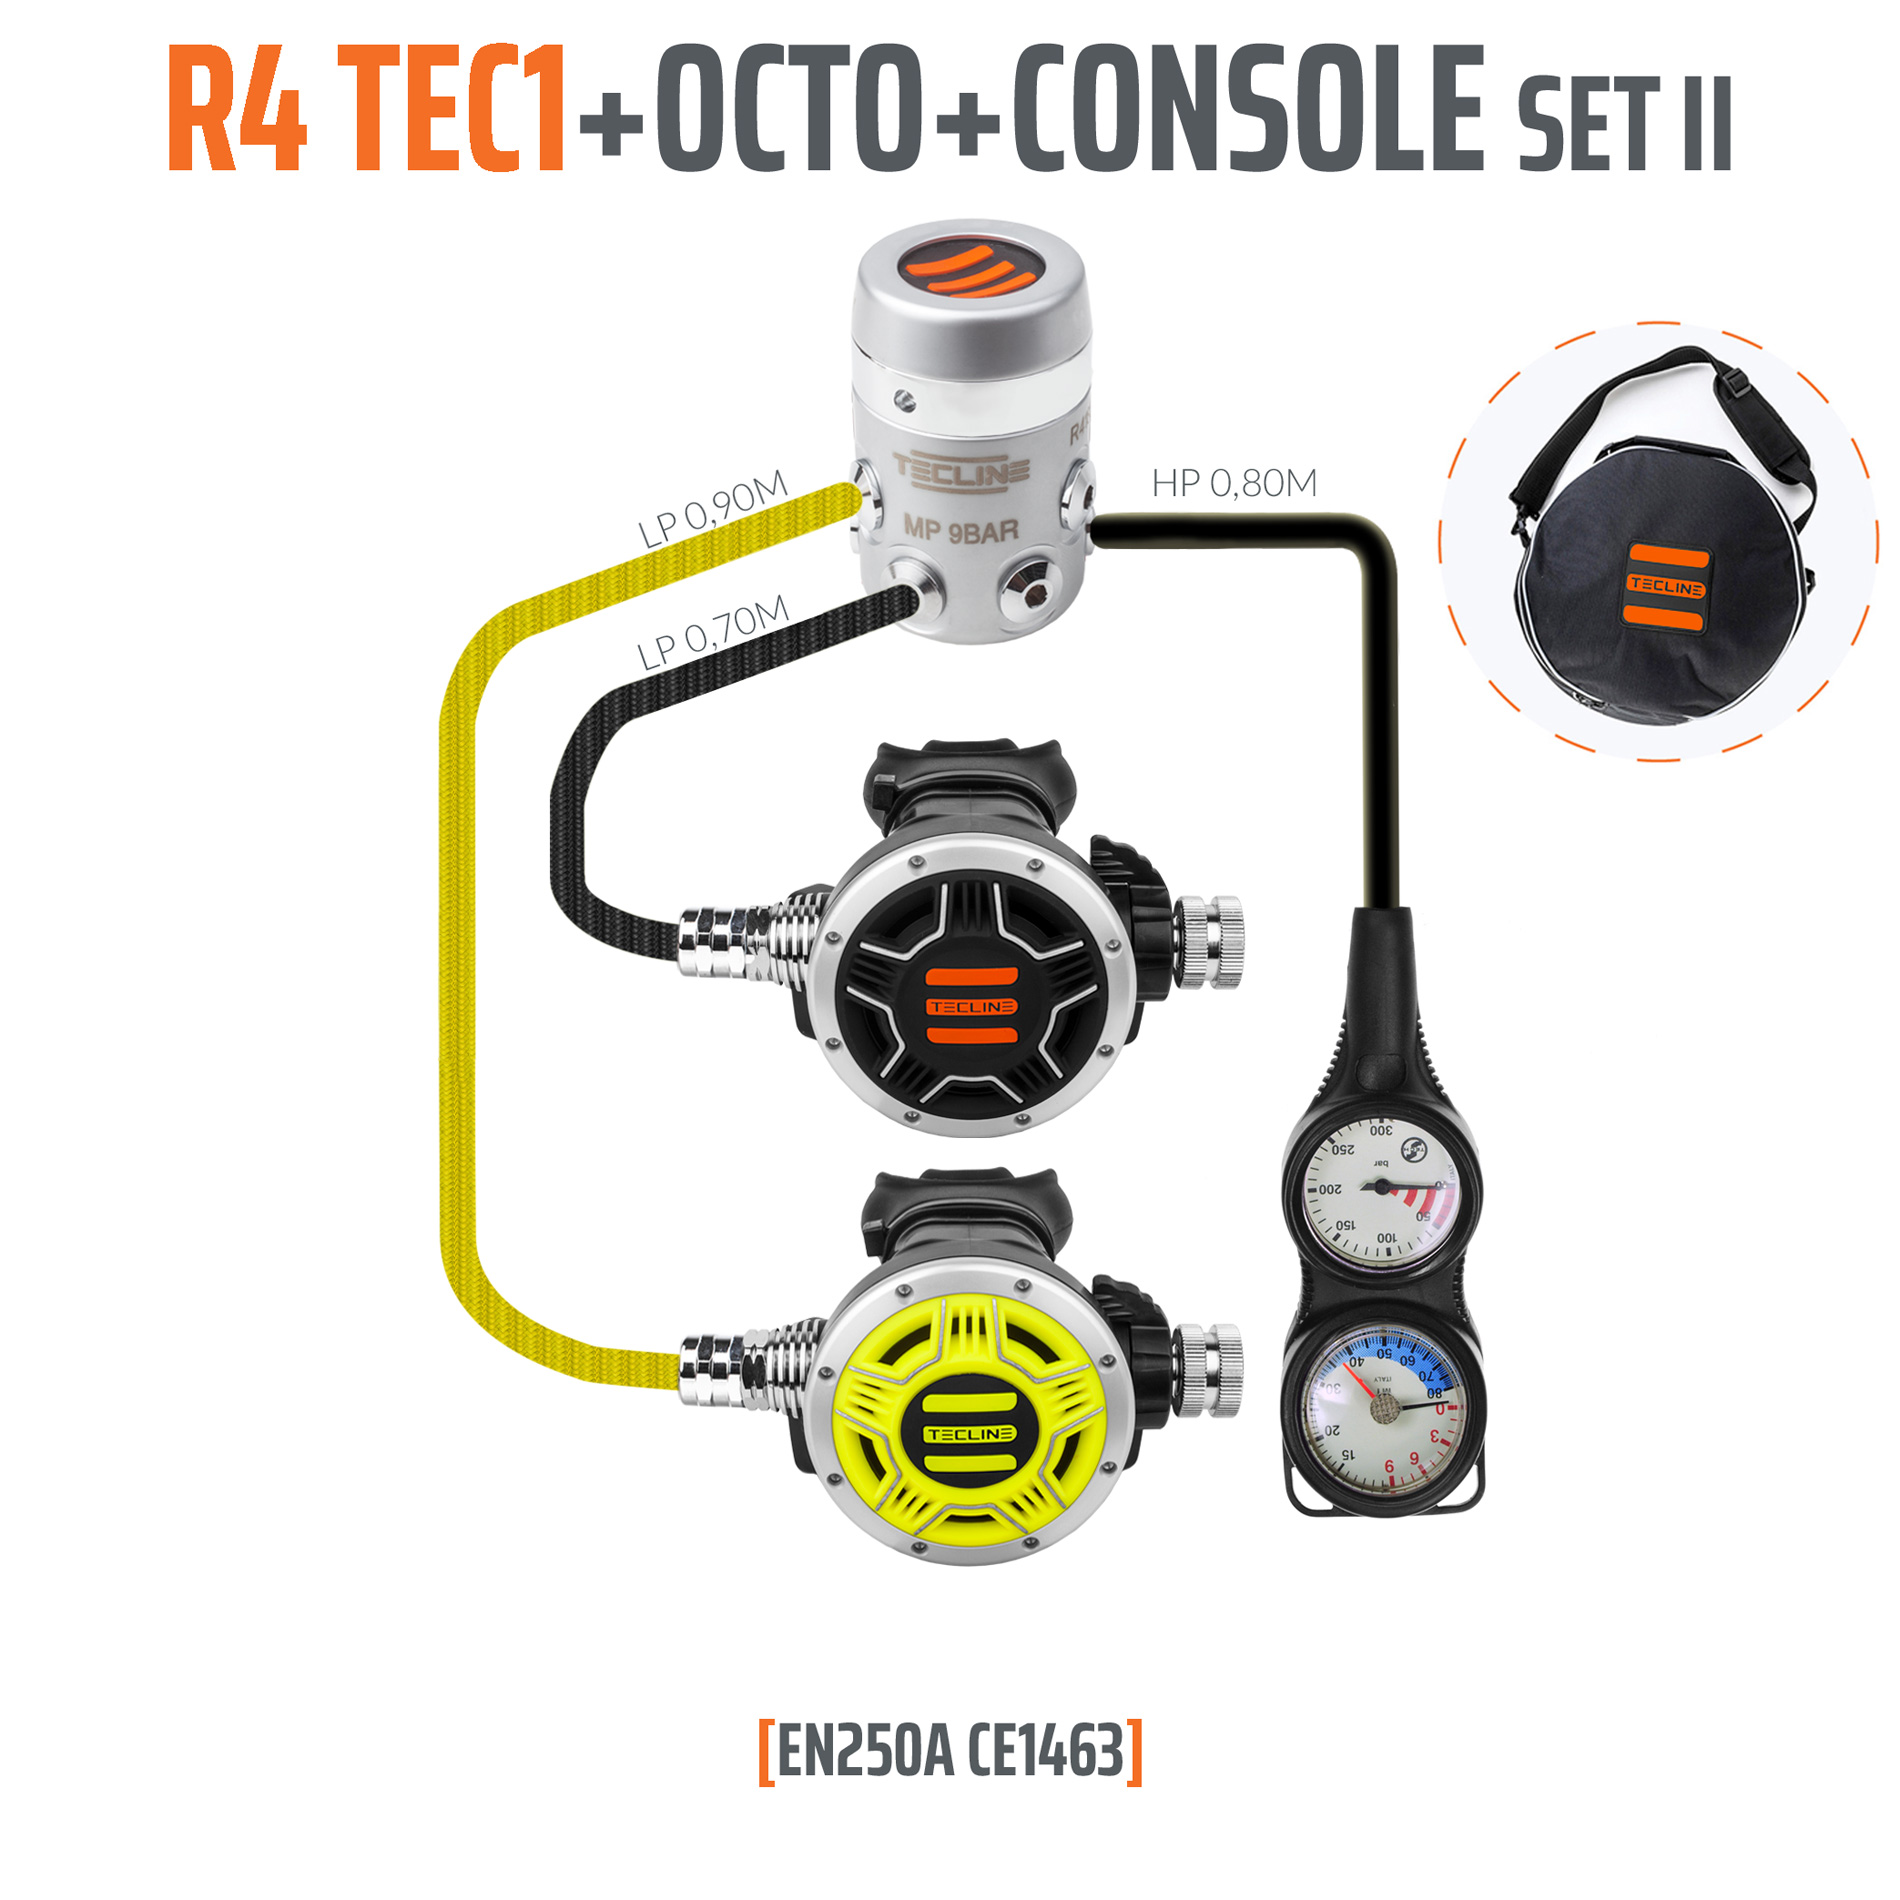 Tecline Regulator R4 TEC1 set II with octo and 2 elements console - EN250A